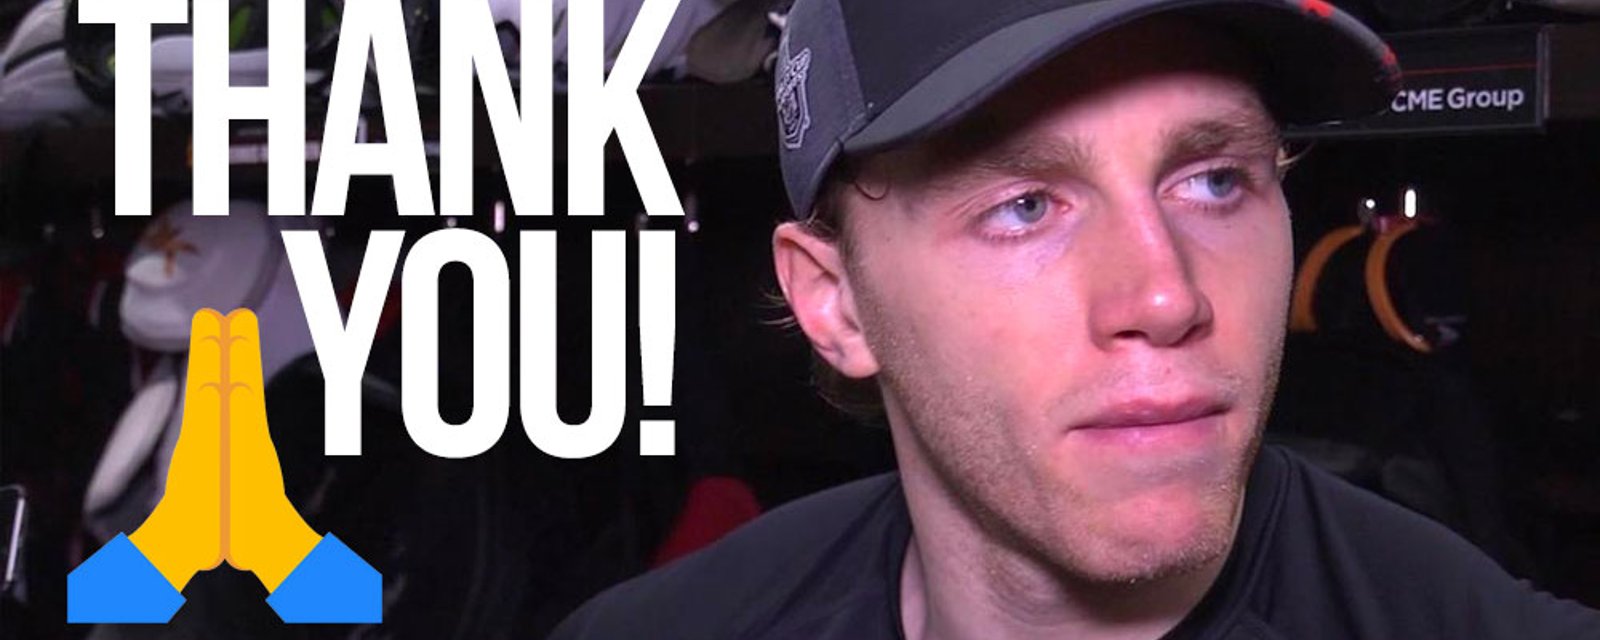 Patrick Kane with an emotional 'goodbye' to Chicago